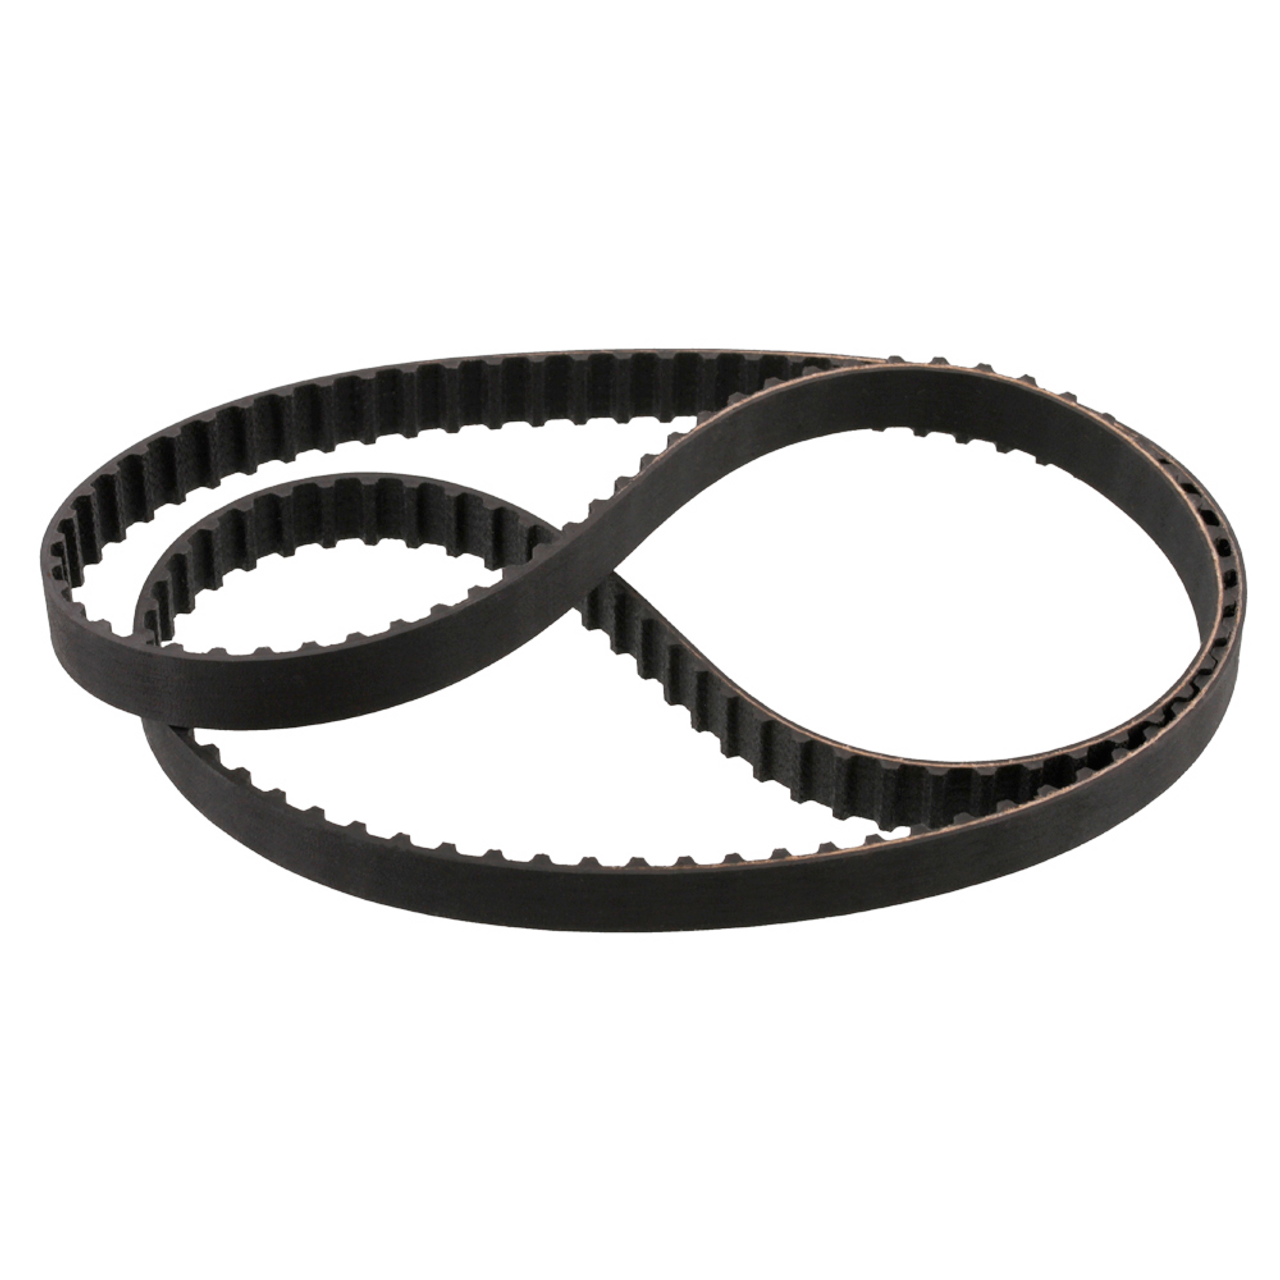 Scotty Spare Drive Belt, For Current Models